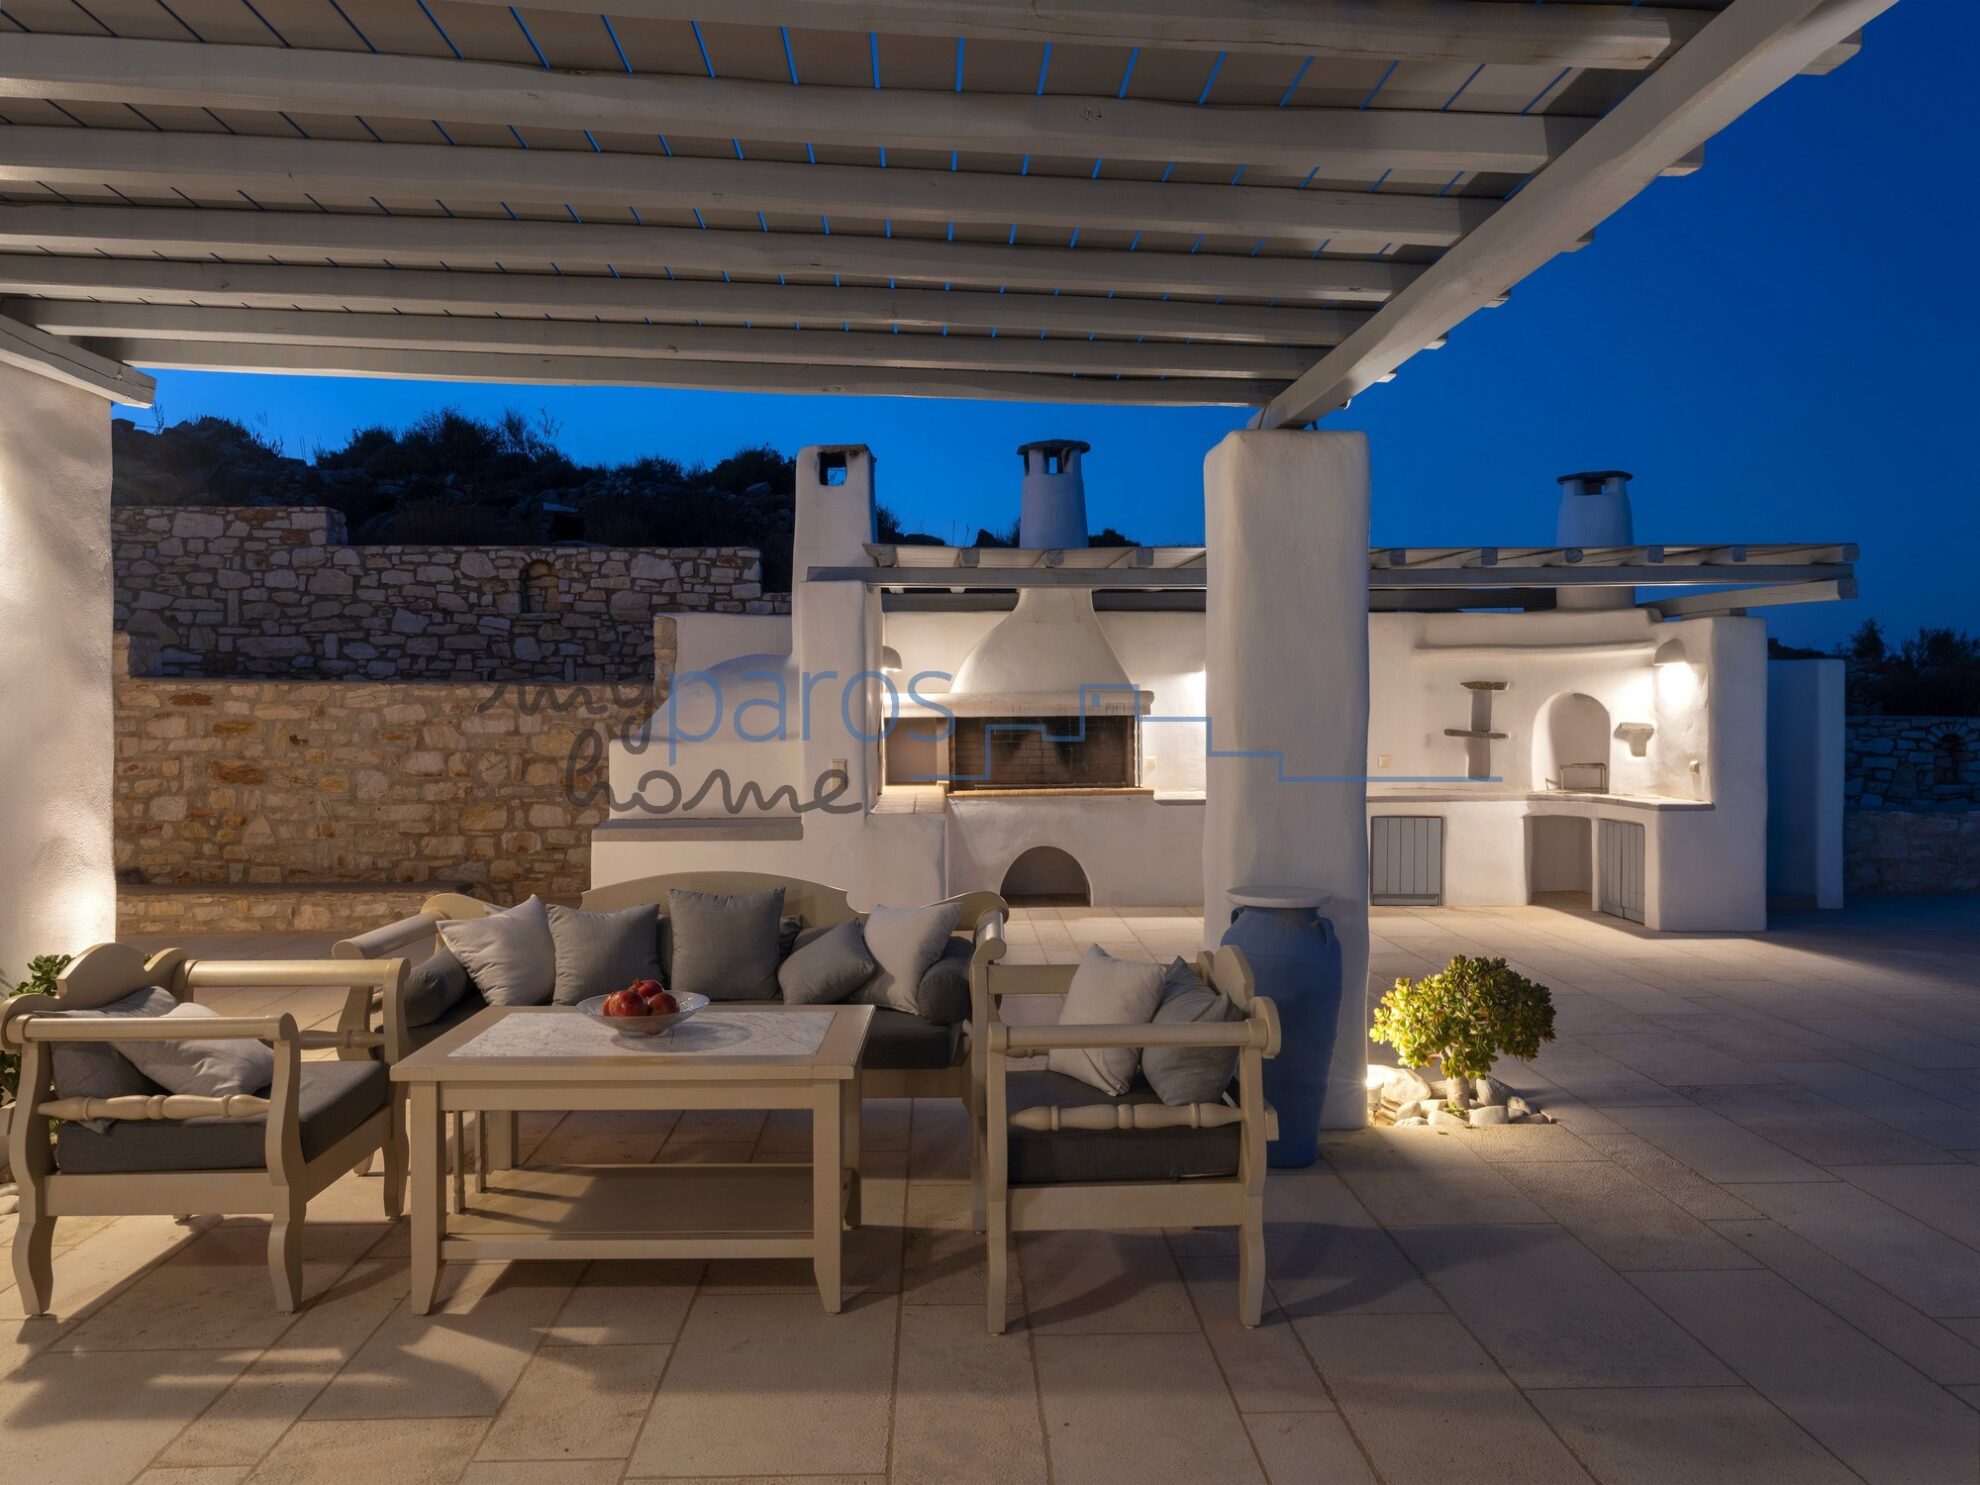 Greece Sotheby's Int. Realty - Paros - Catrice28